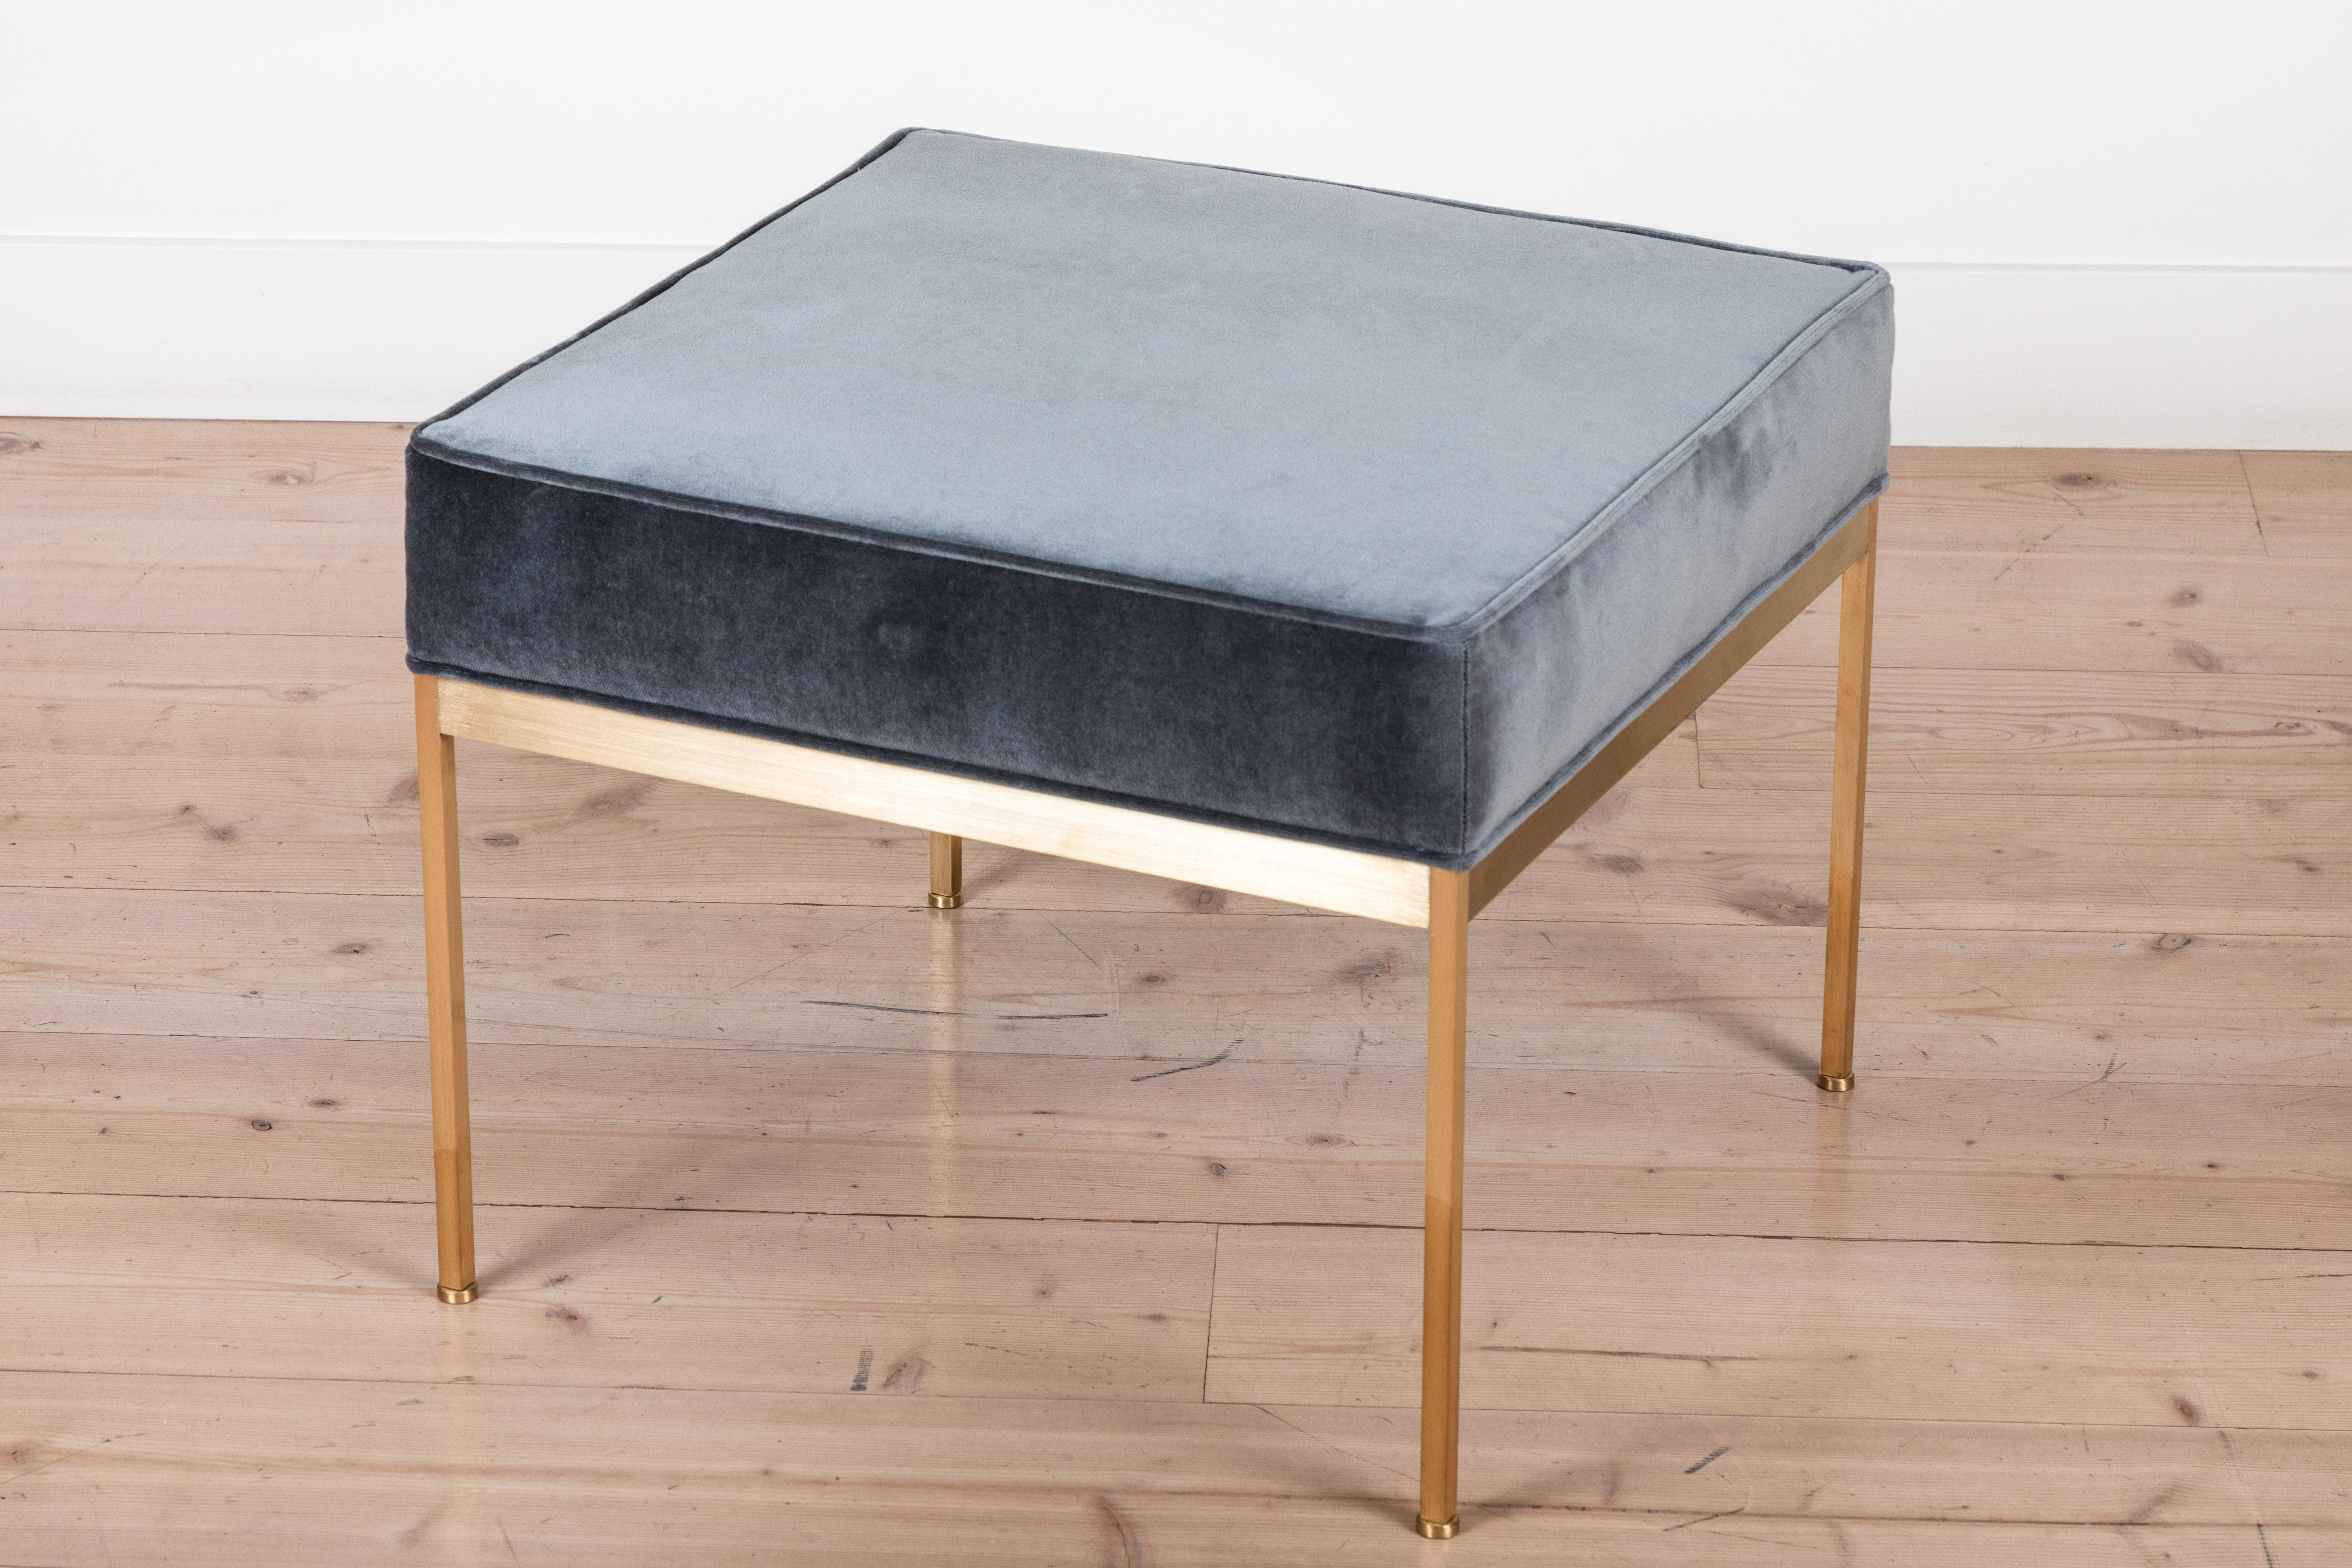 The Paul Ottoman features a solid unlacquered brass base and an upholstered seat with piping. Each leg features a rounded leveler. 

Available to order in customer's own material with a 6-8 week lead time. 

As shown: $1,575 each
To order: $1,395 +